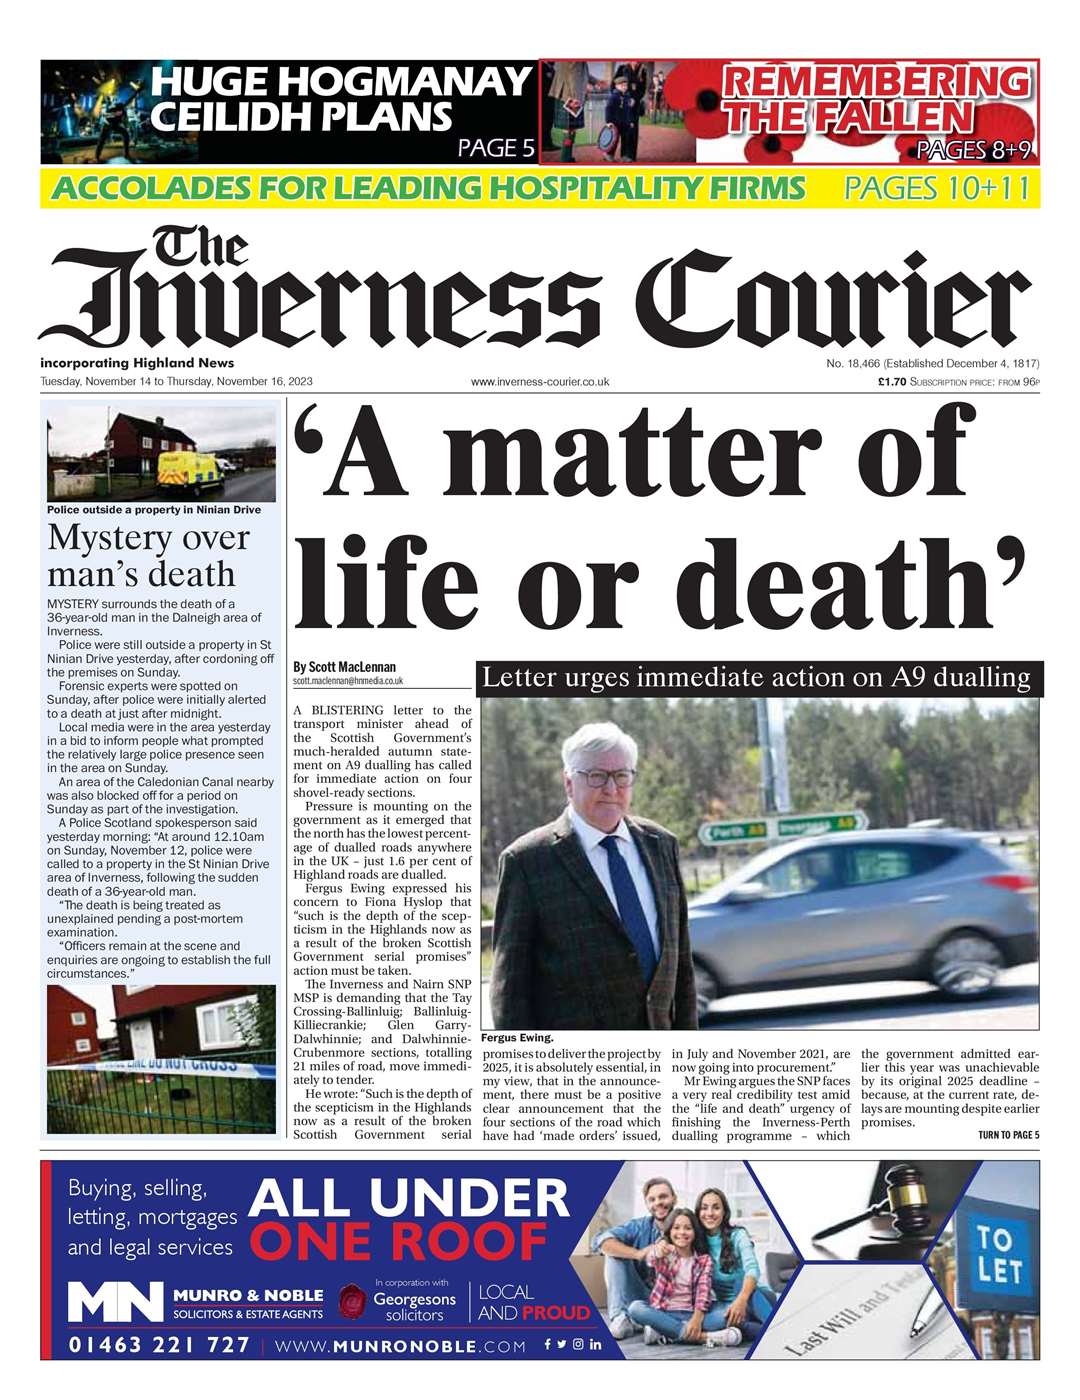 The Inverness Courier, November 14, front page.